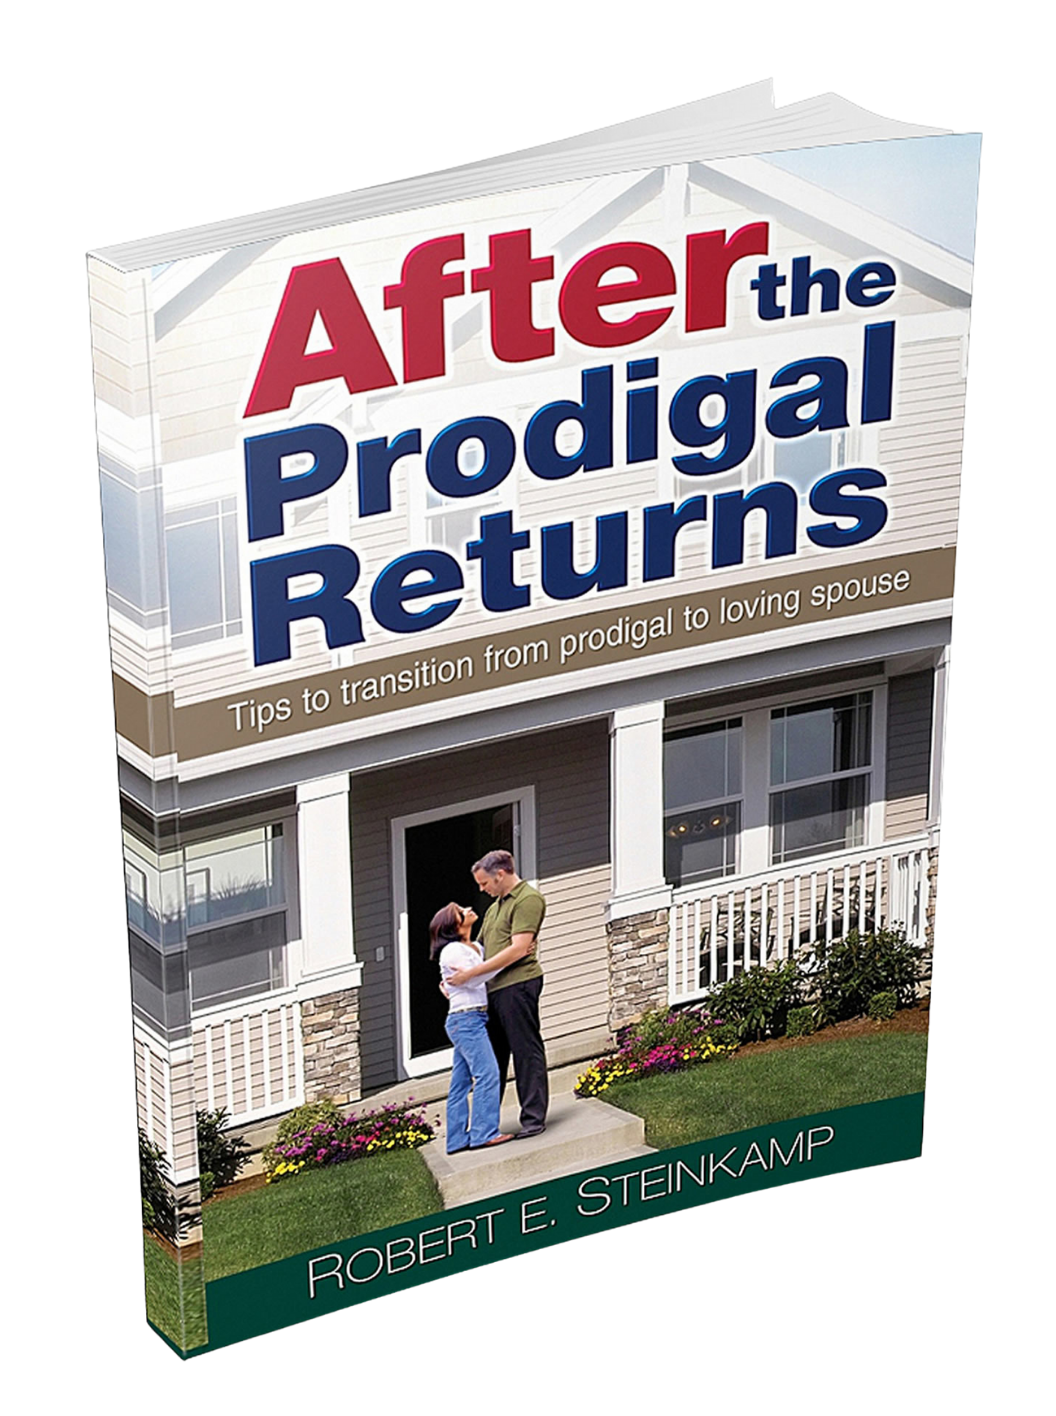 AFTER THE PRODIGAL RETURNS/STANDING AFTER THE PRODIGAL RETURNS